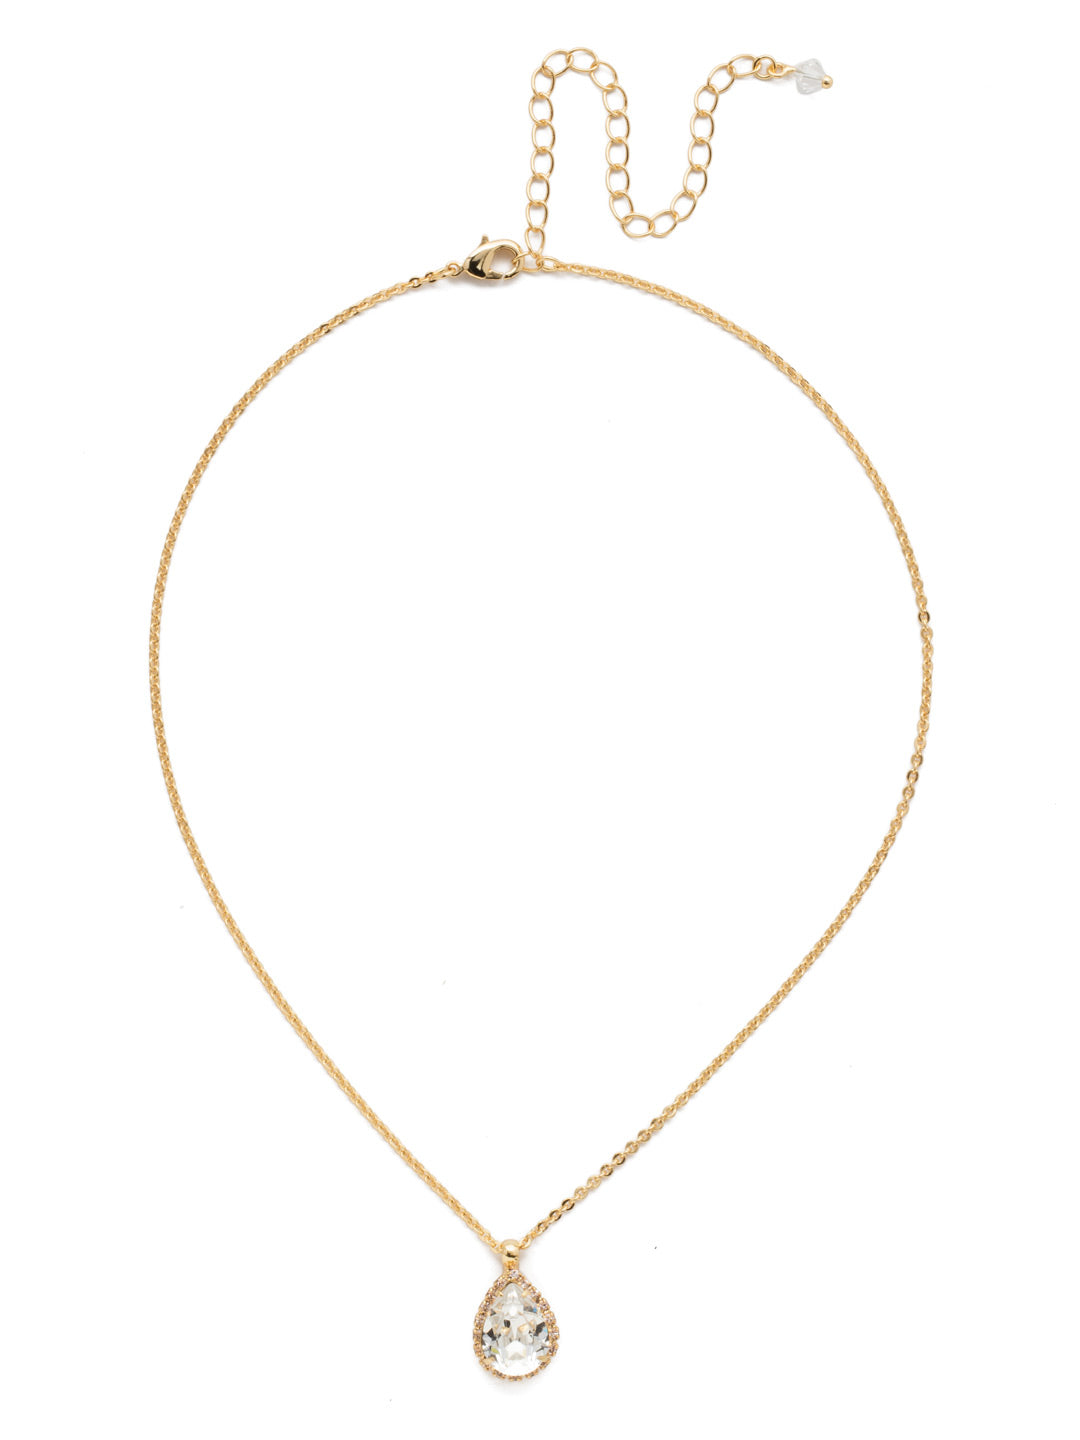 Rain Droplet  Necklace - NDY16BGPLS - <p>A delicate pear shaped crystal with a decorative rhinestone border adds just the right amount of sparkle and shine! From Sorrelli's Soft Petal collection in our Bright Gold-tone finish.</p>